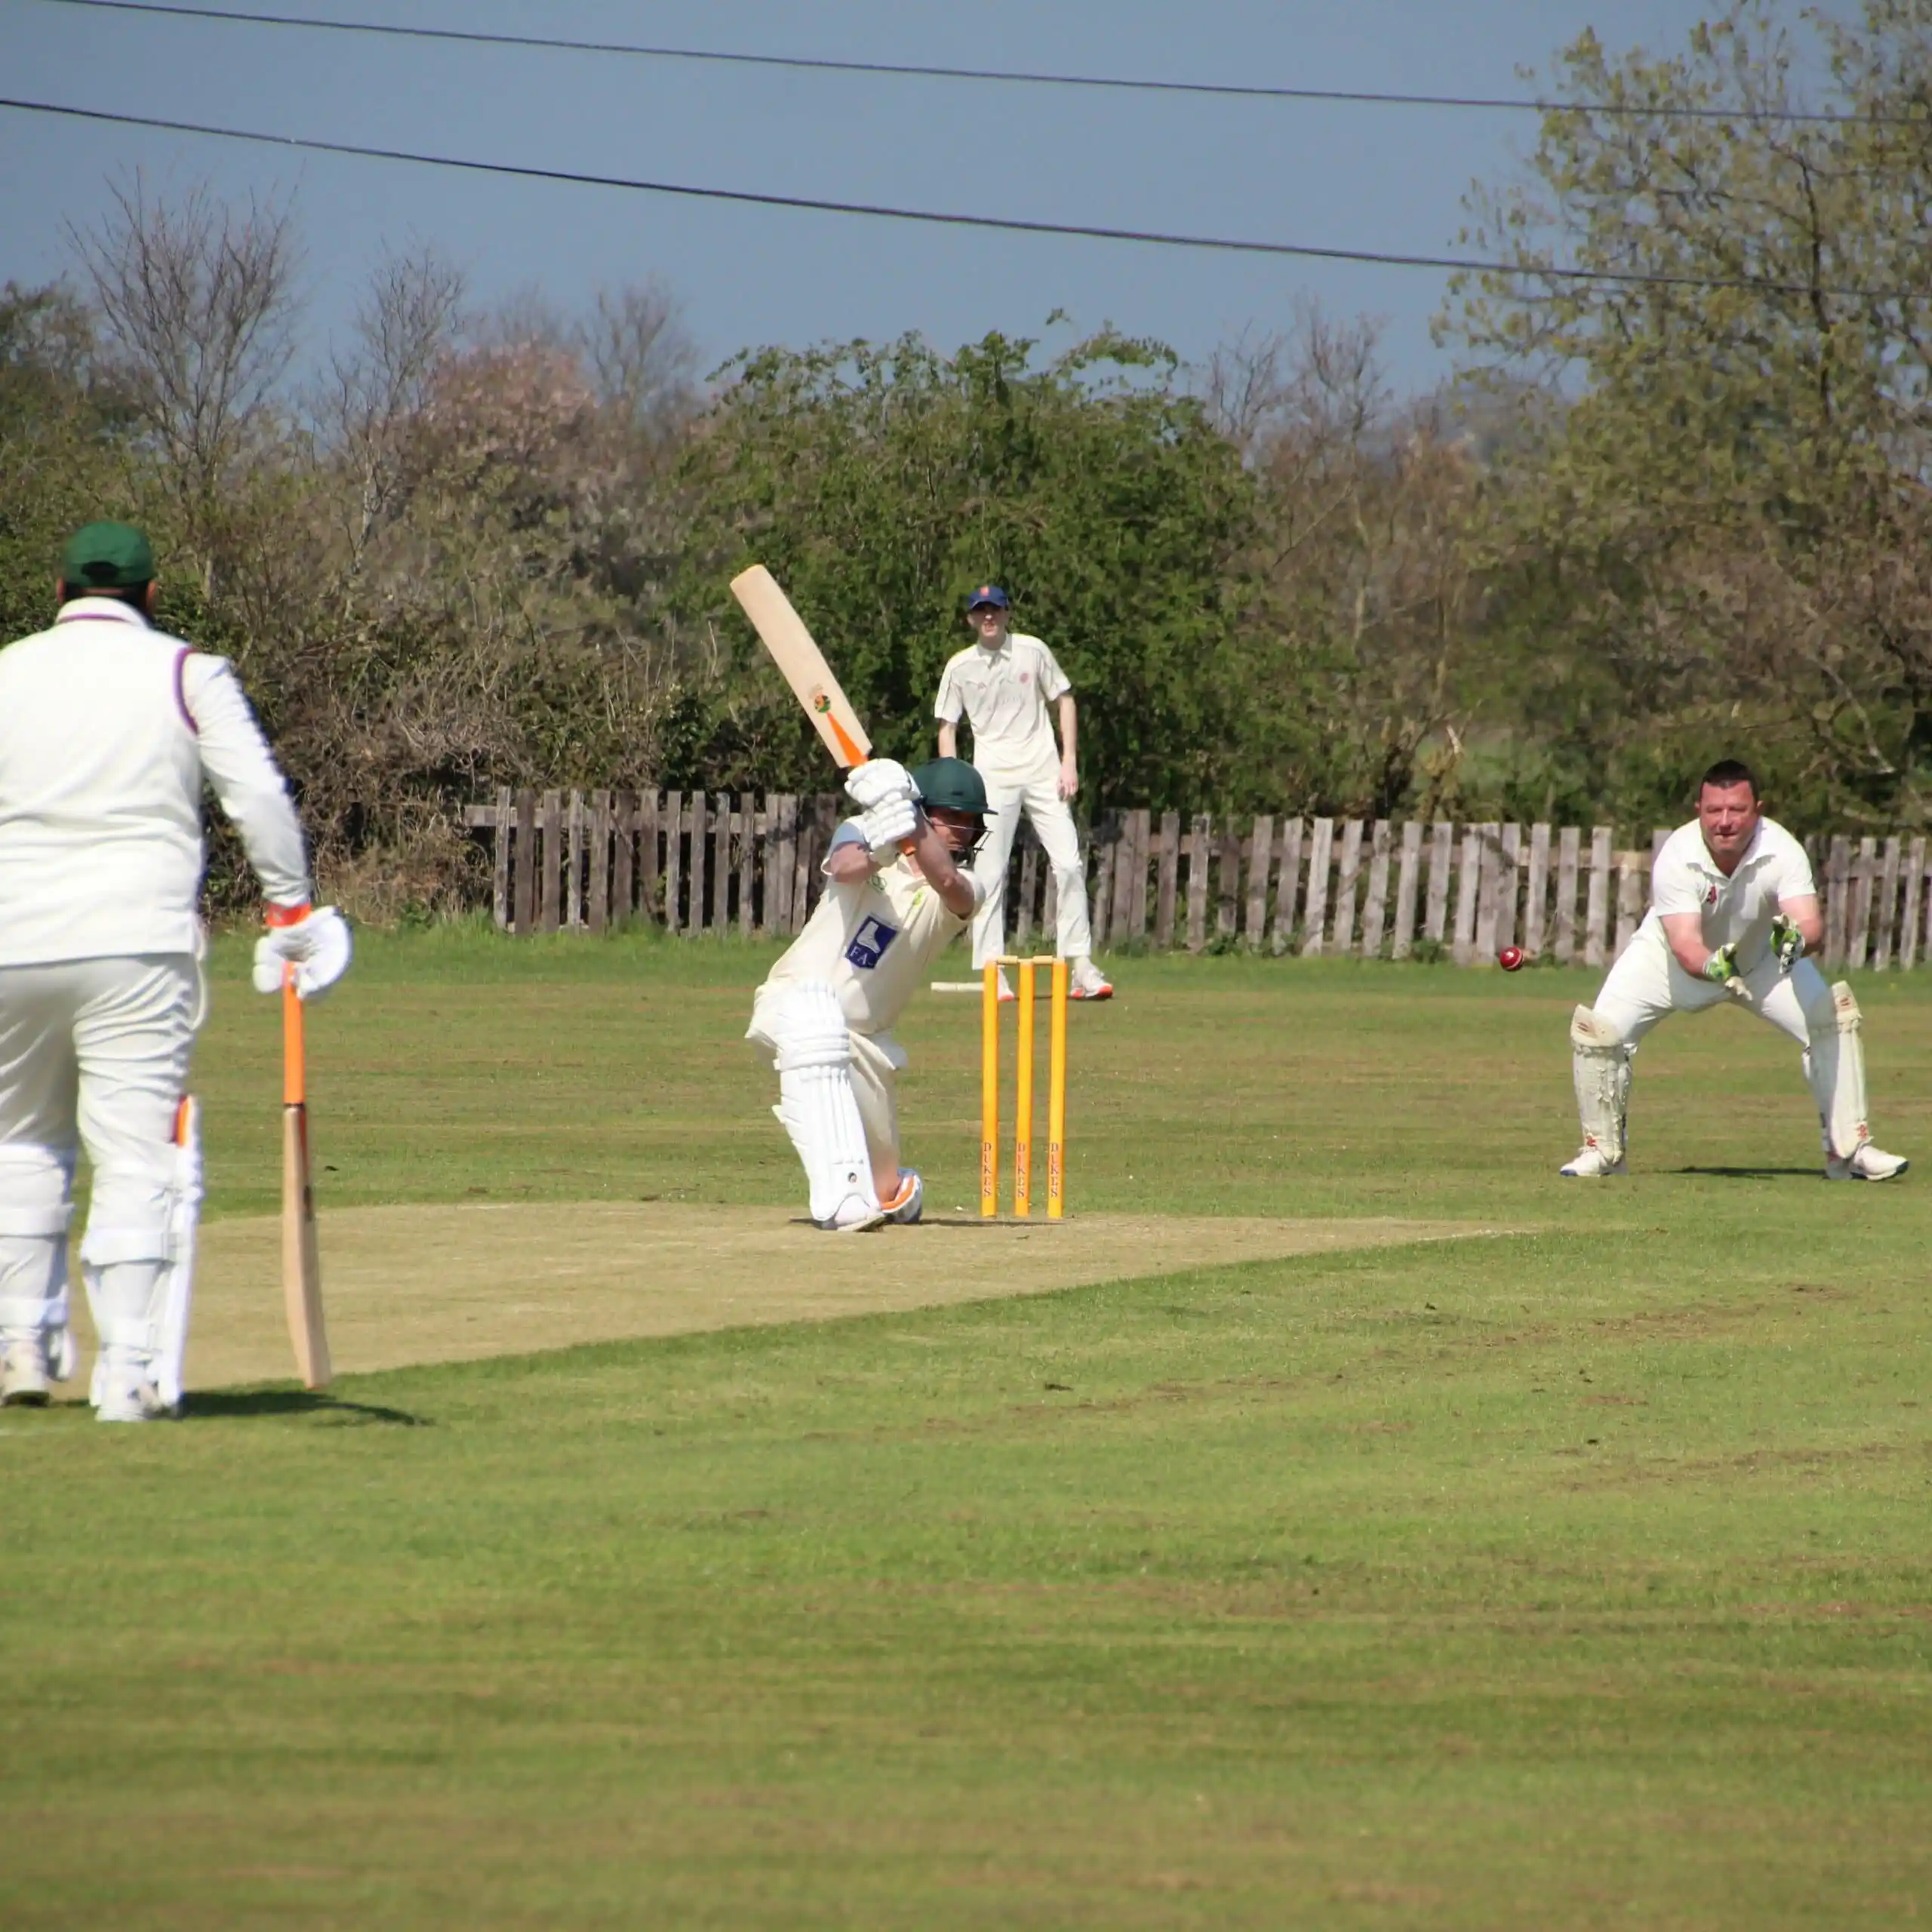 Our cheap long handle cricket bat in action